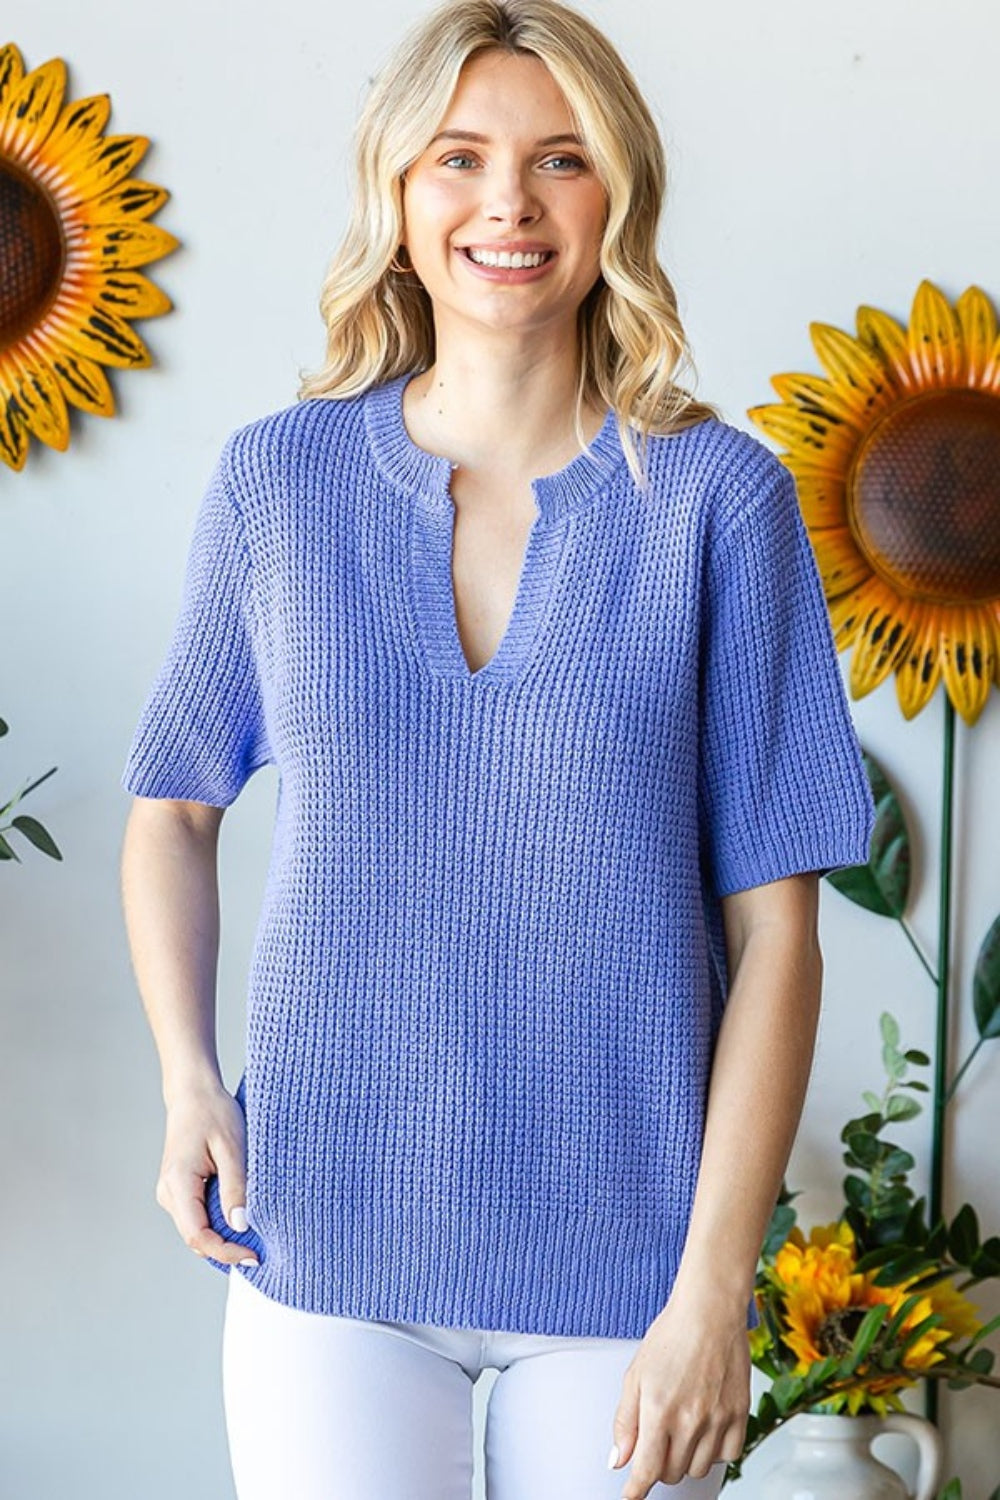 Notched Neck Short Sleeve Knit Top in Periwinkle